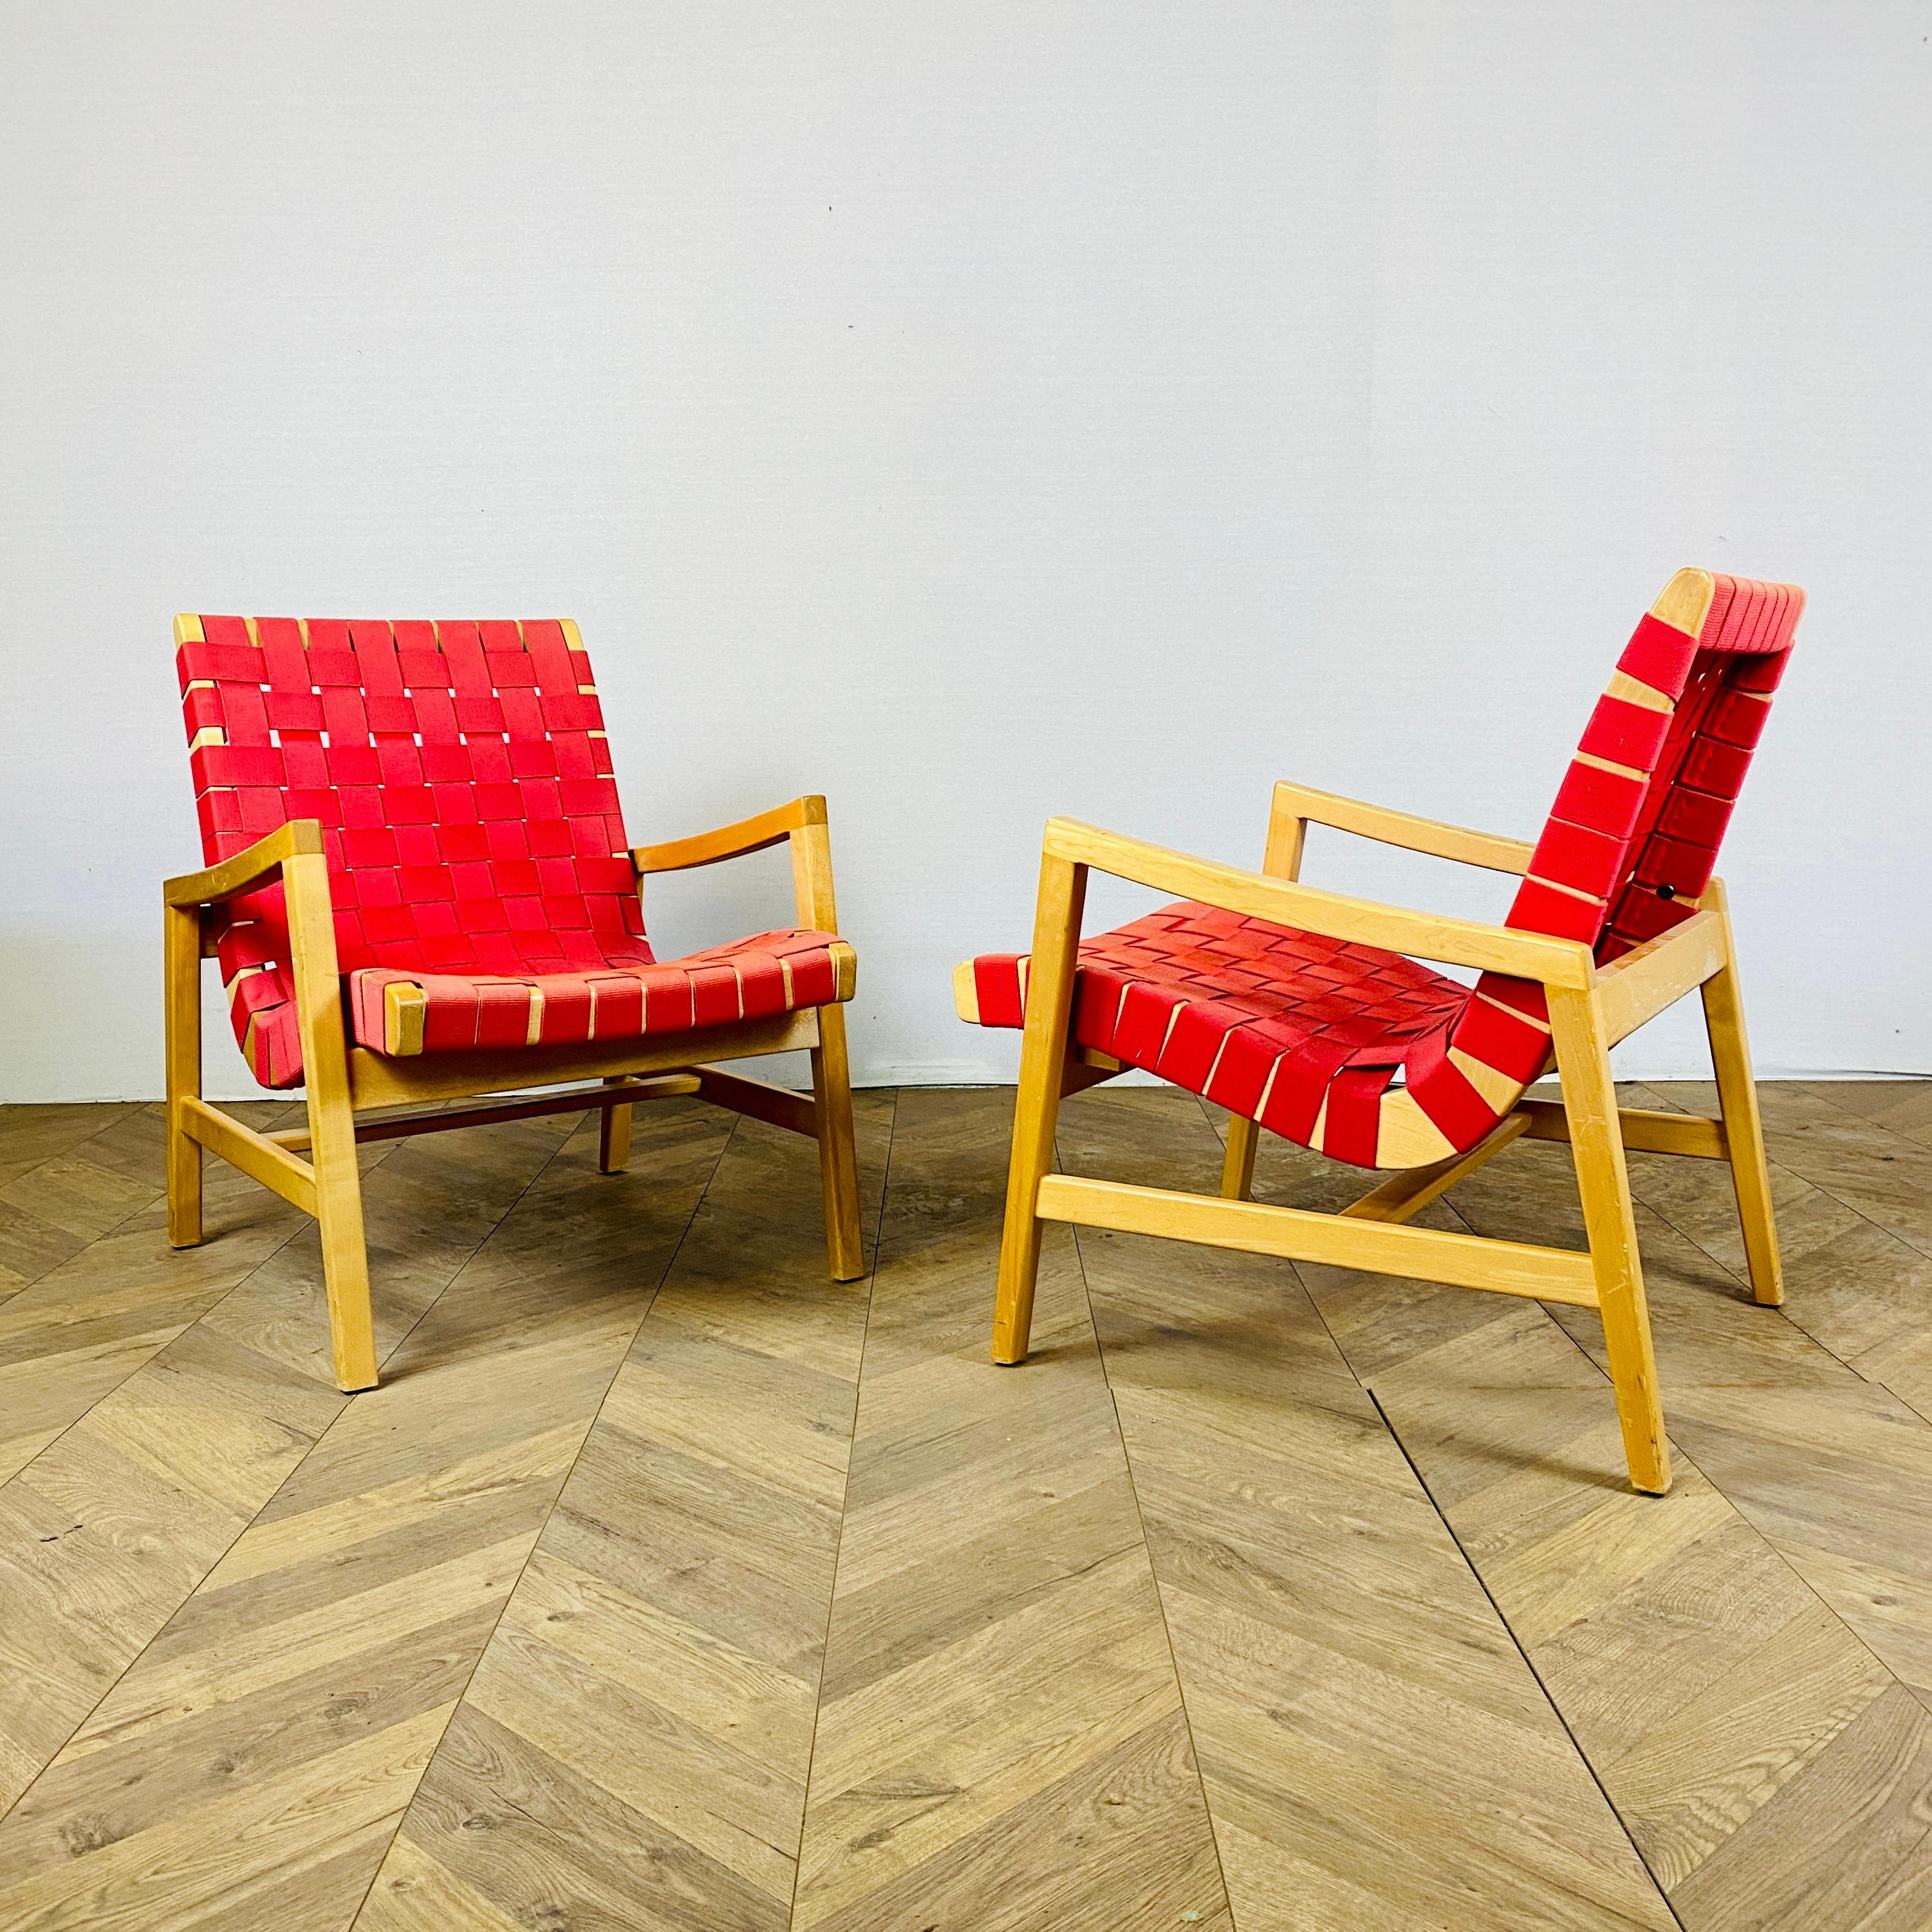 A Pair of Super Stylish armchairs Designed by Jens Risom in 1941 for Knoll.

Boasting clean lines and crafted from high quality maple with strap work / webbed seating, the chairs are super comfortable with great proportions.

In good vintage